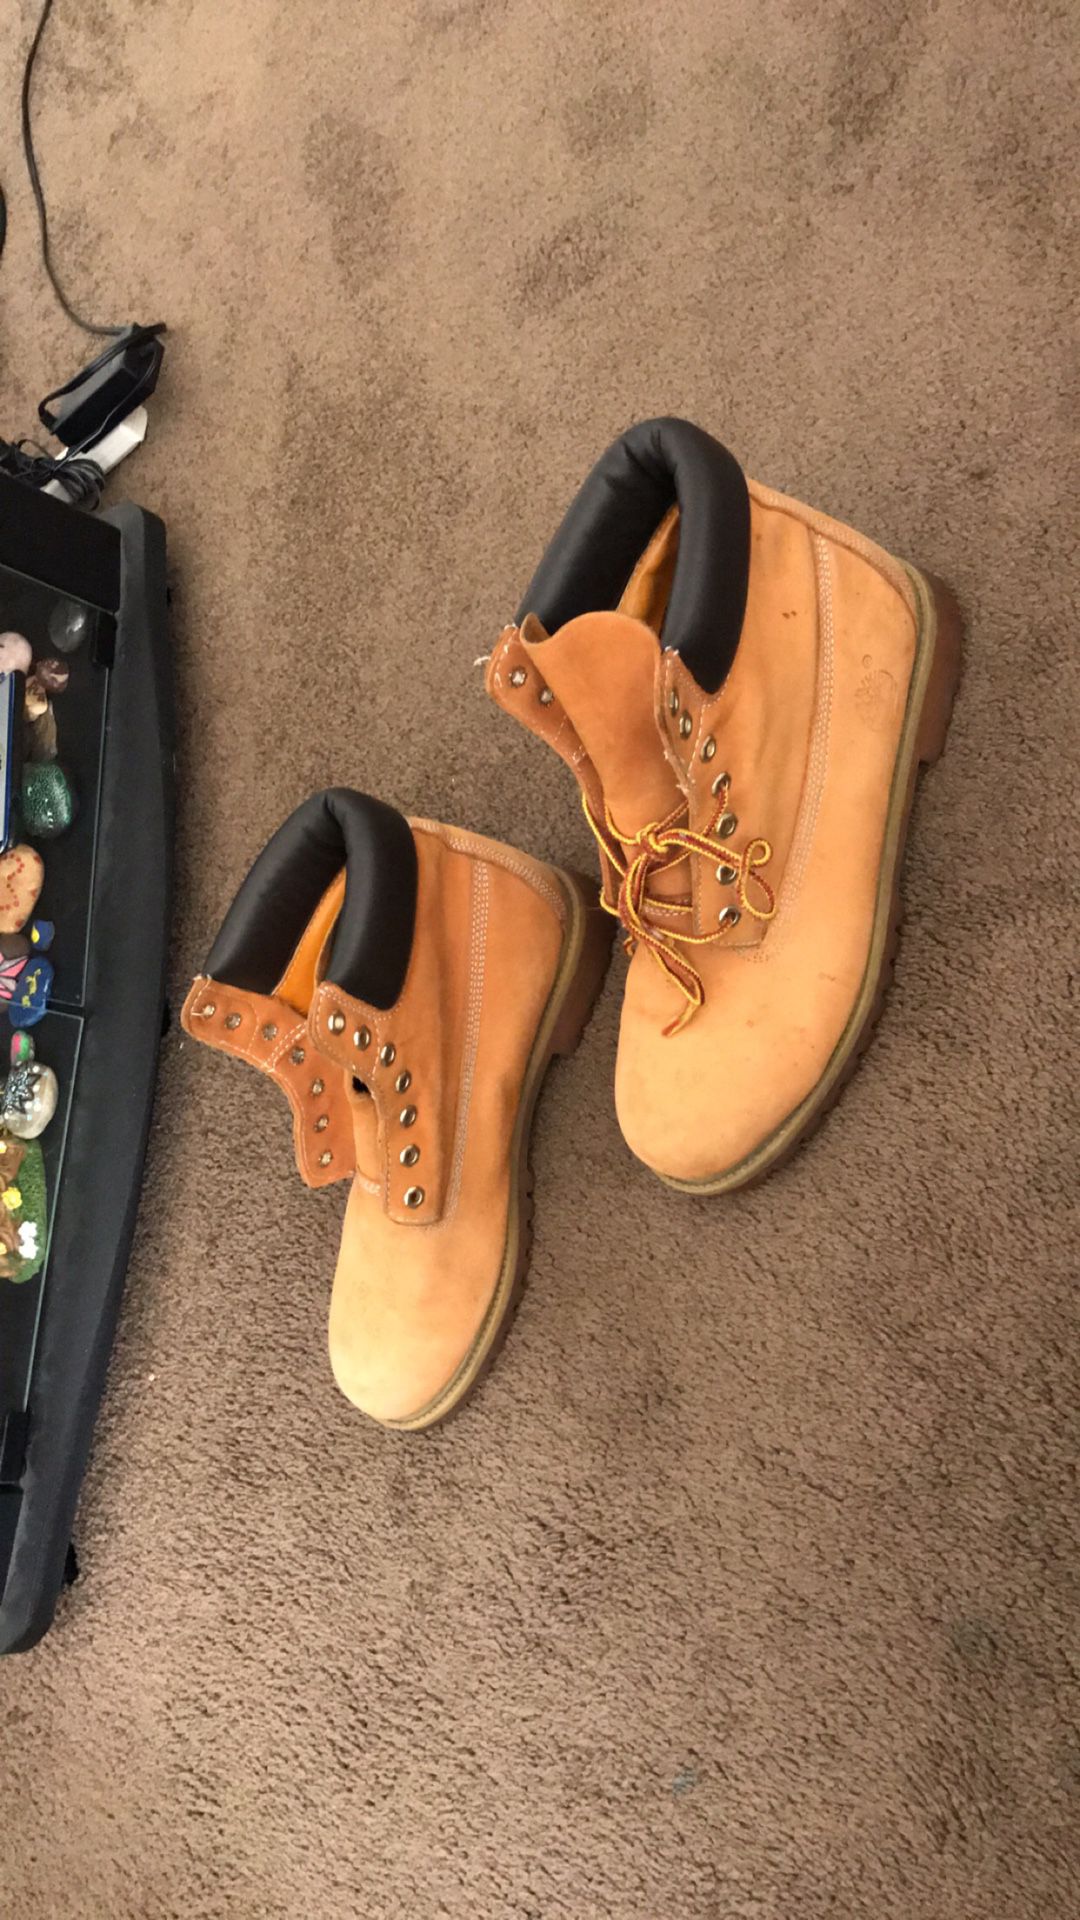 Timberland boots for work size 10 mens $50